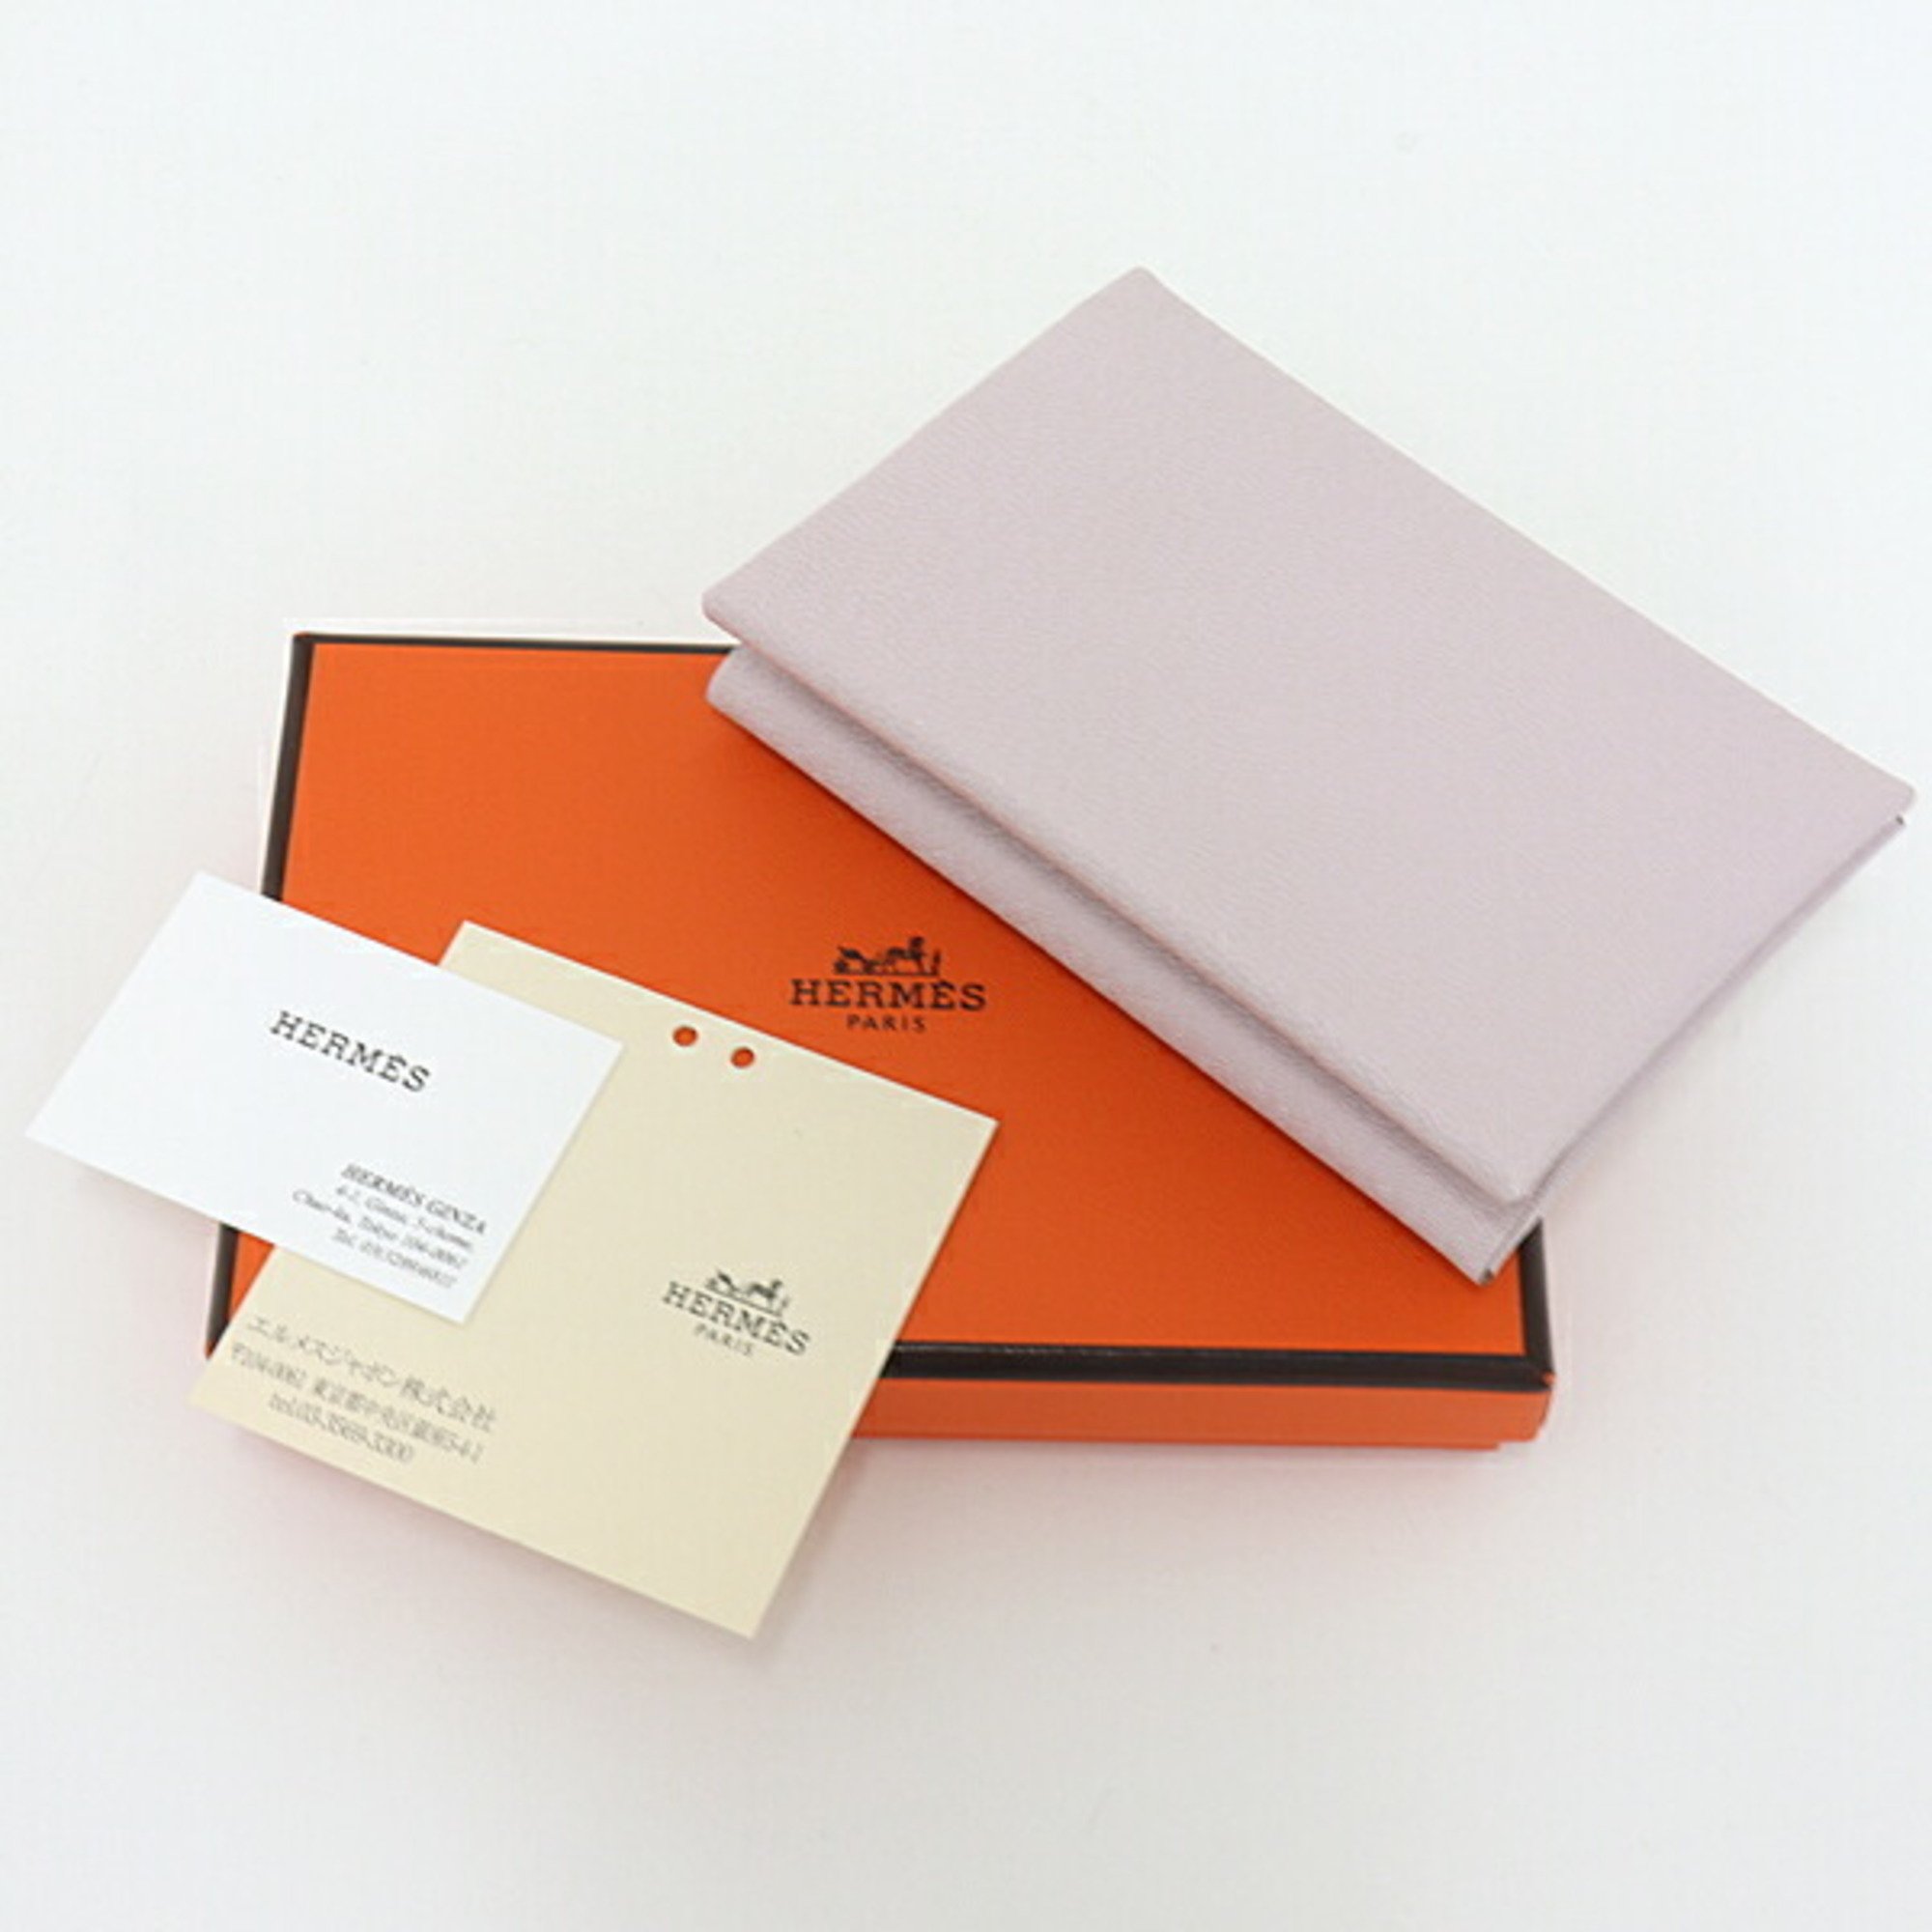 Hermes HERMES Calvi Duo Card Case Mauve Pale Chevre U Engraved (Made in 2022) Business Holder Coin Purse